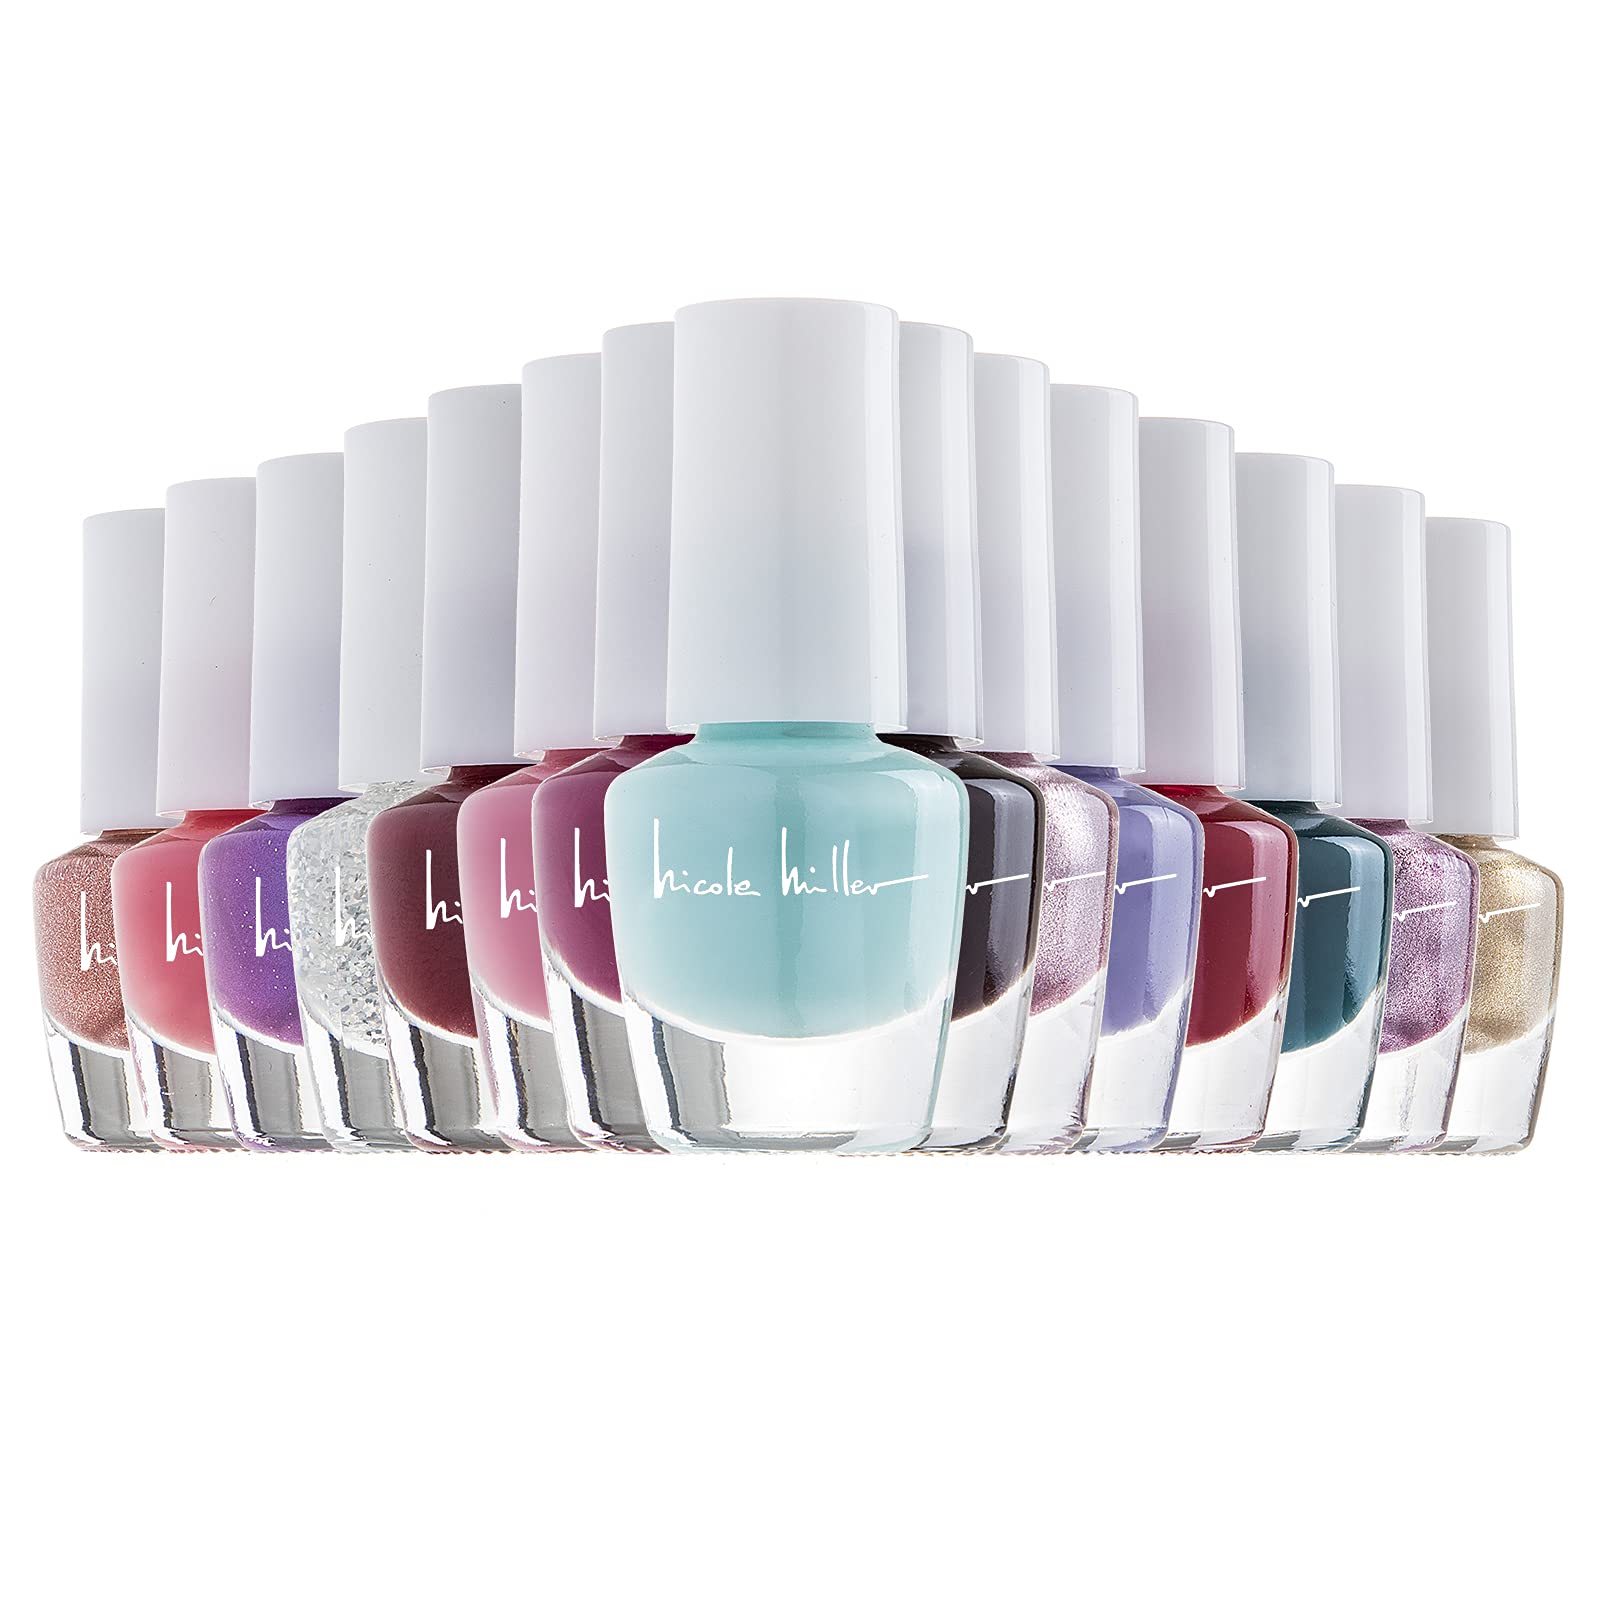 DeBelle Gel Nail Lacquer Macaroon Squad Gift Set For Women Online in India  – DeBelle Cosmetix Online Store